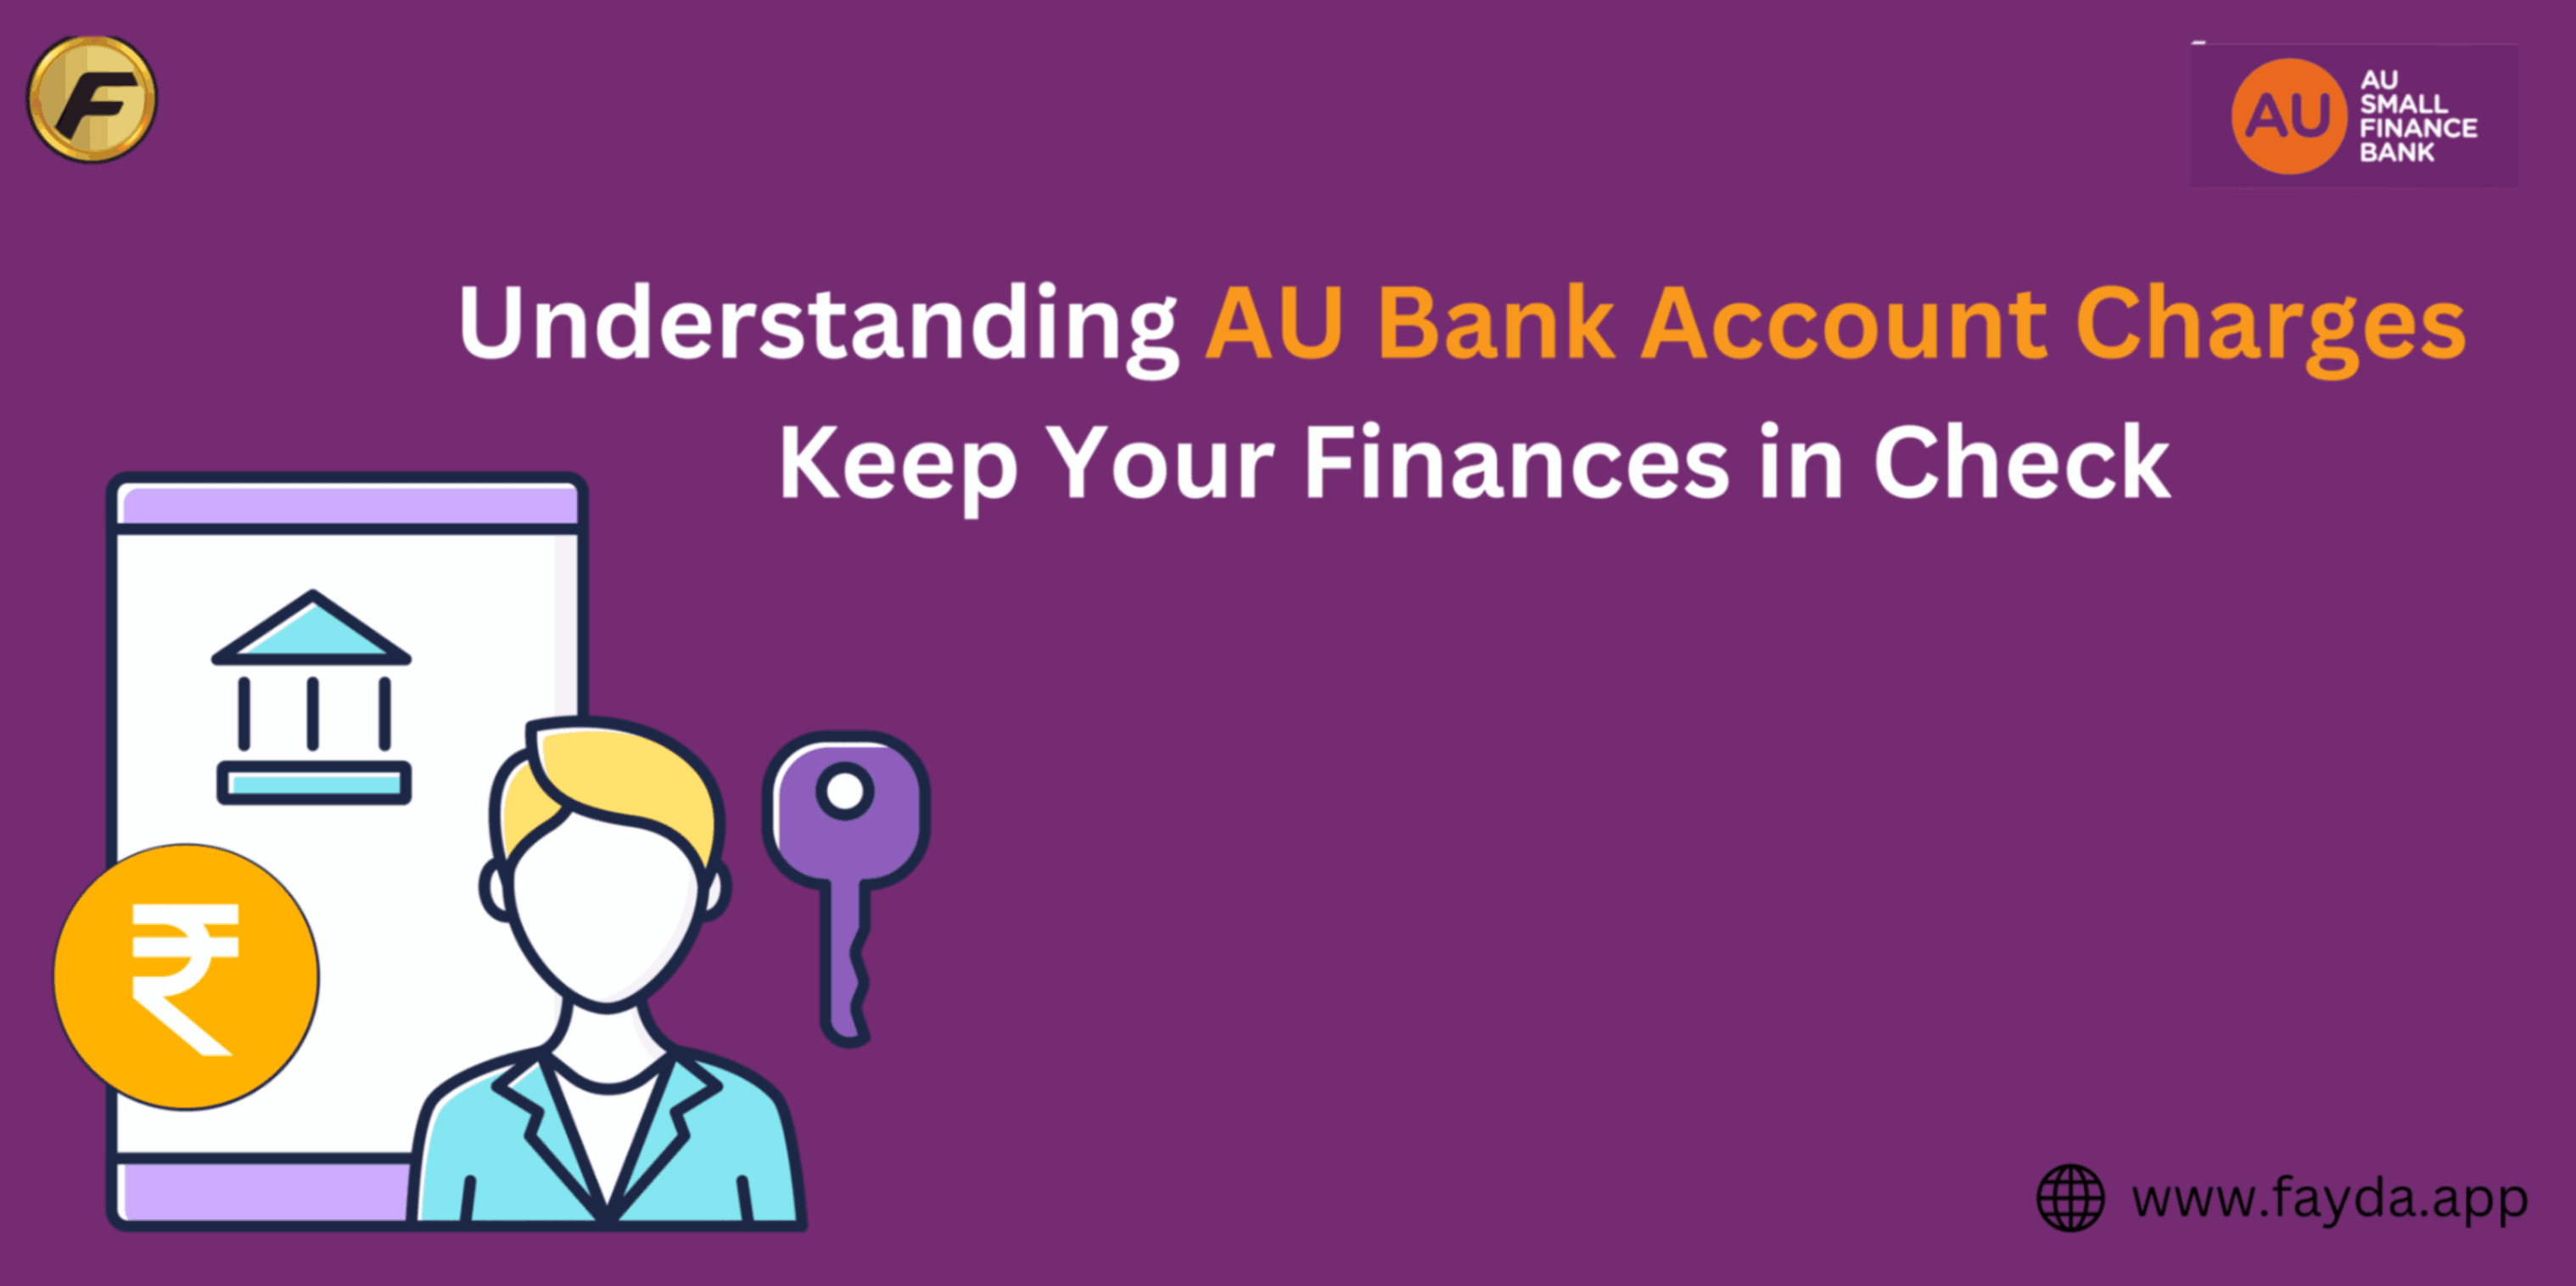 Understanding AU Bank Account Charges: Keep Your Finances in Check